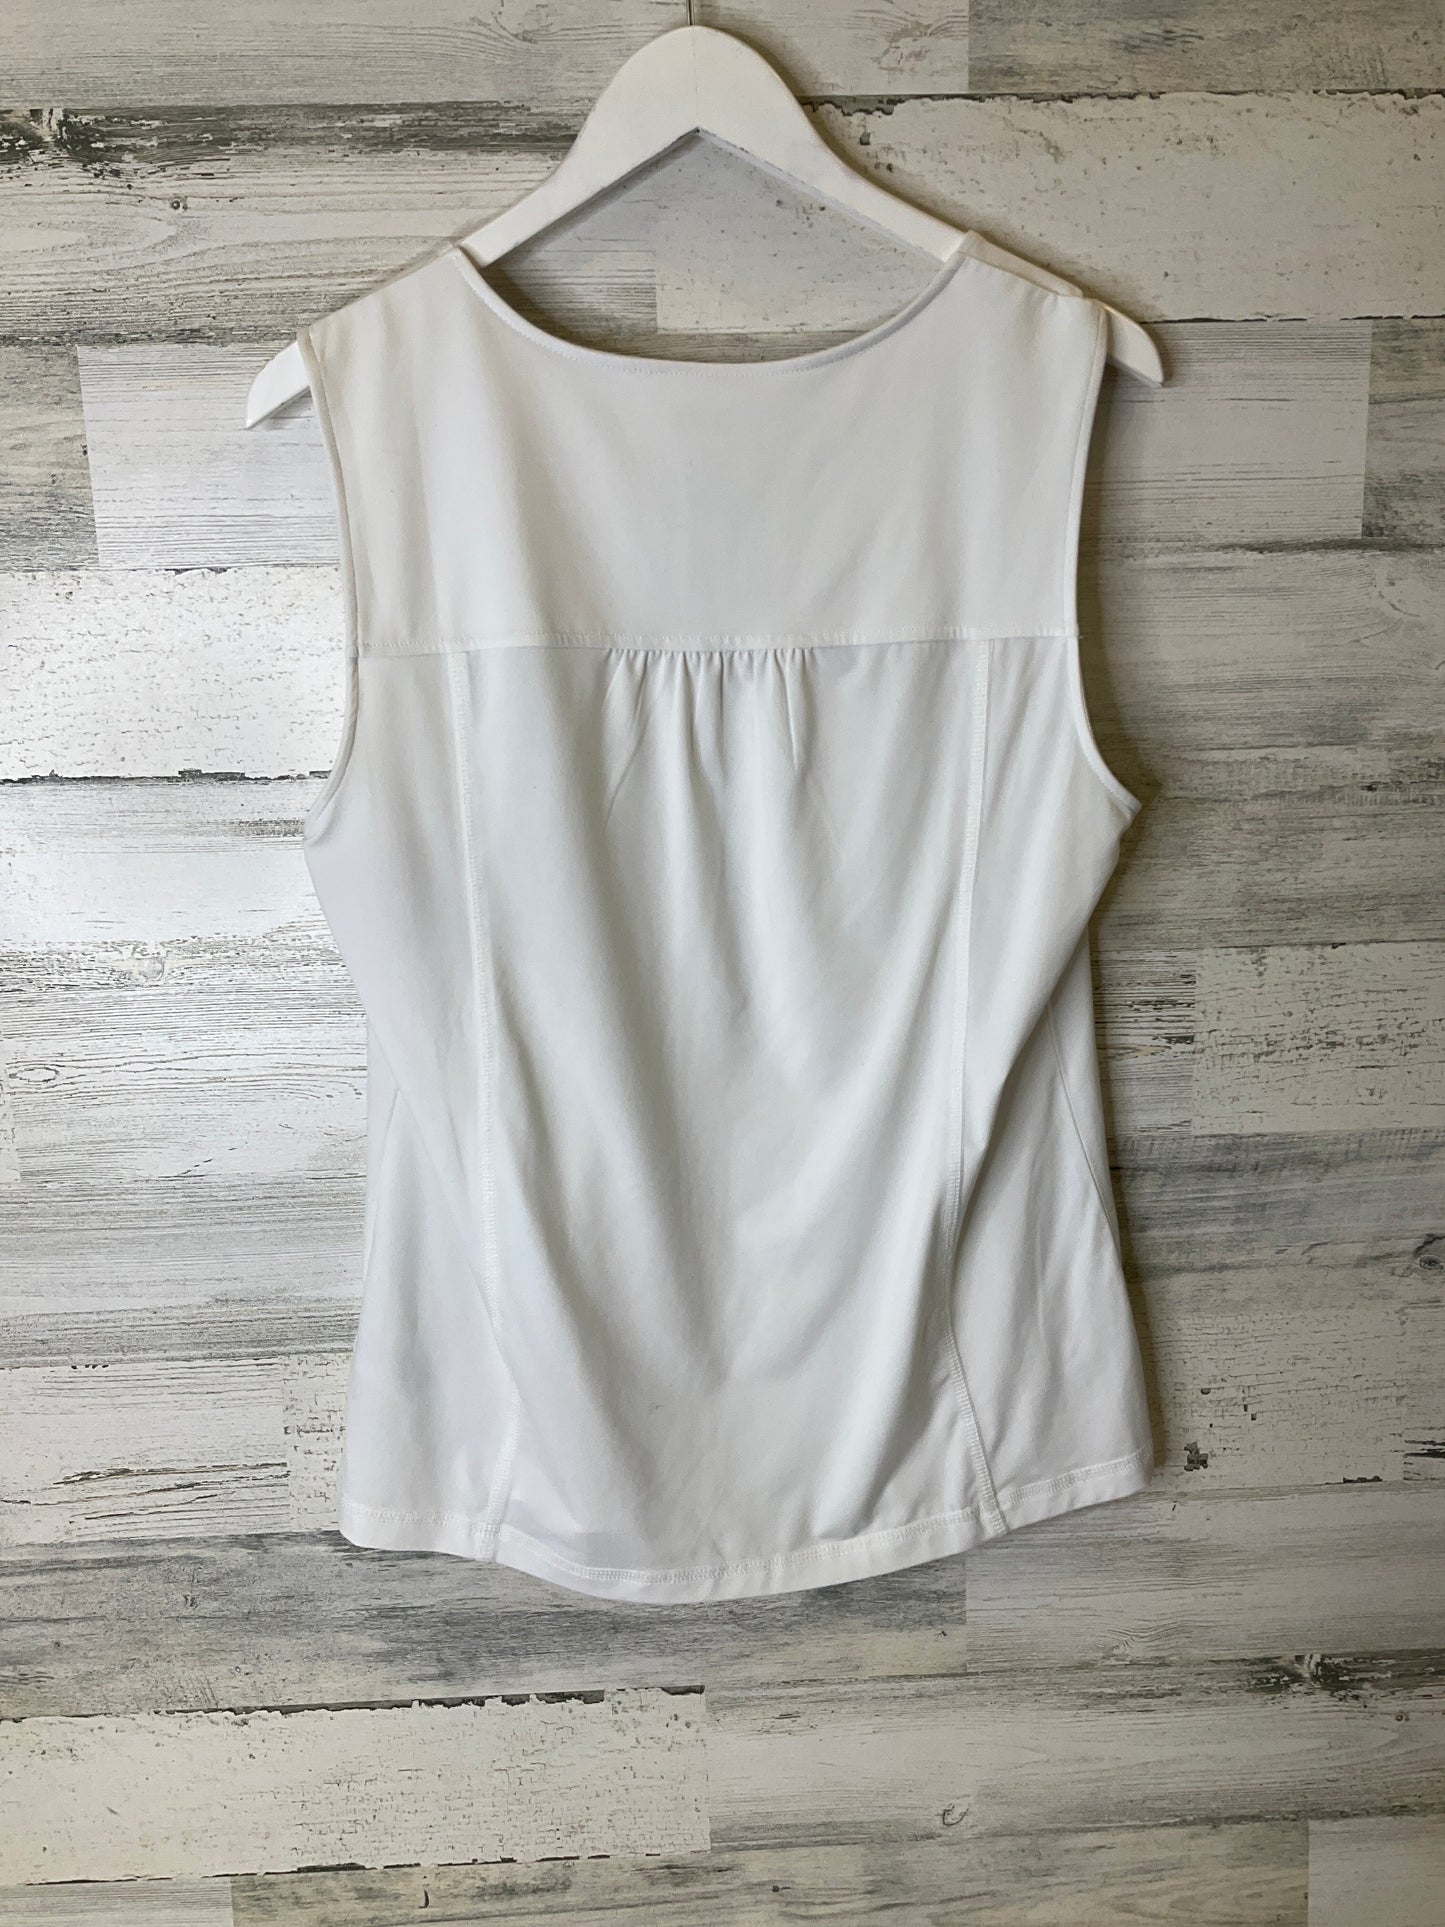 Athletic Tank Top By Izod  Size: L